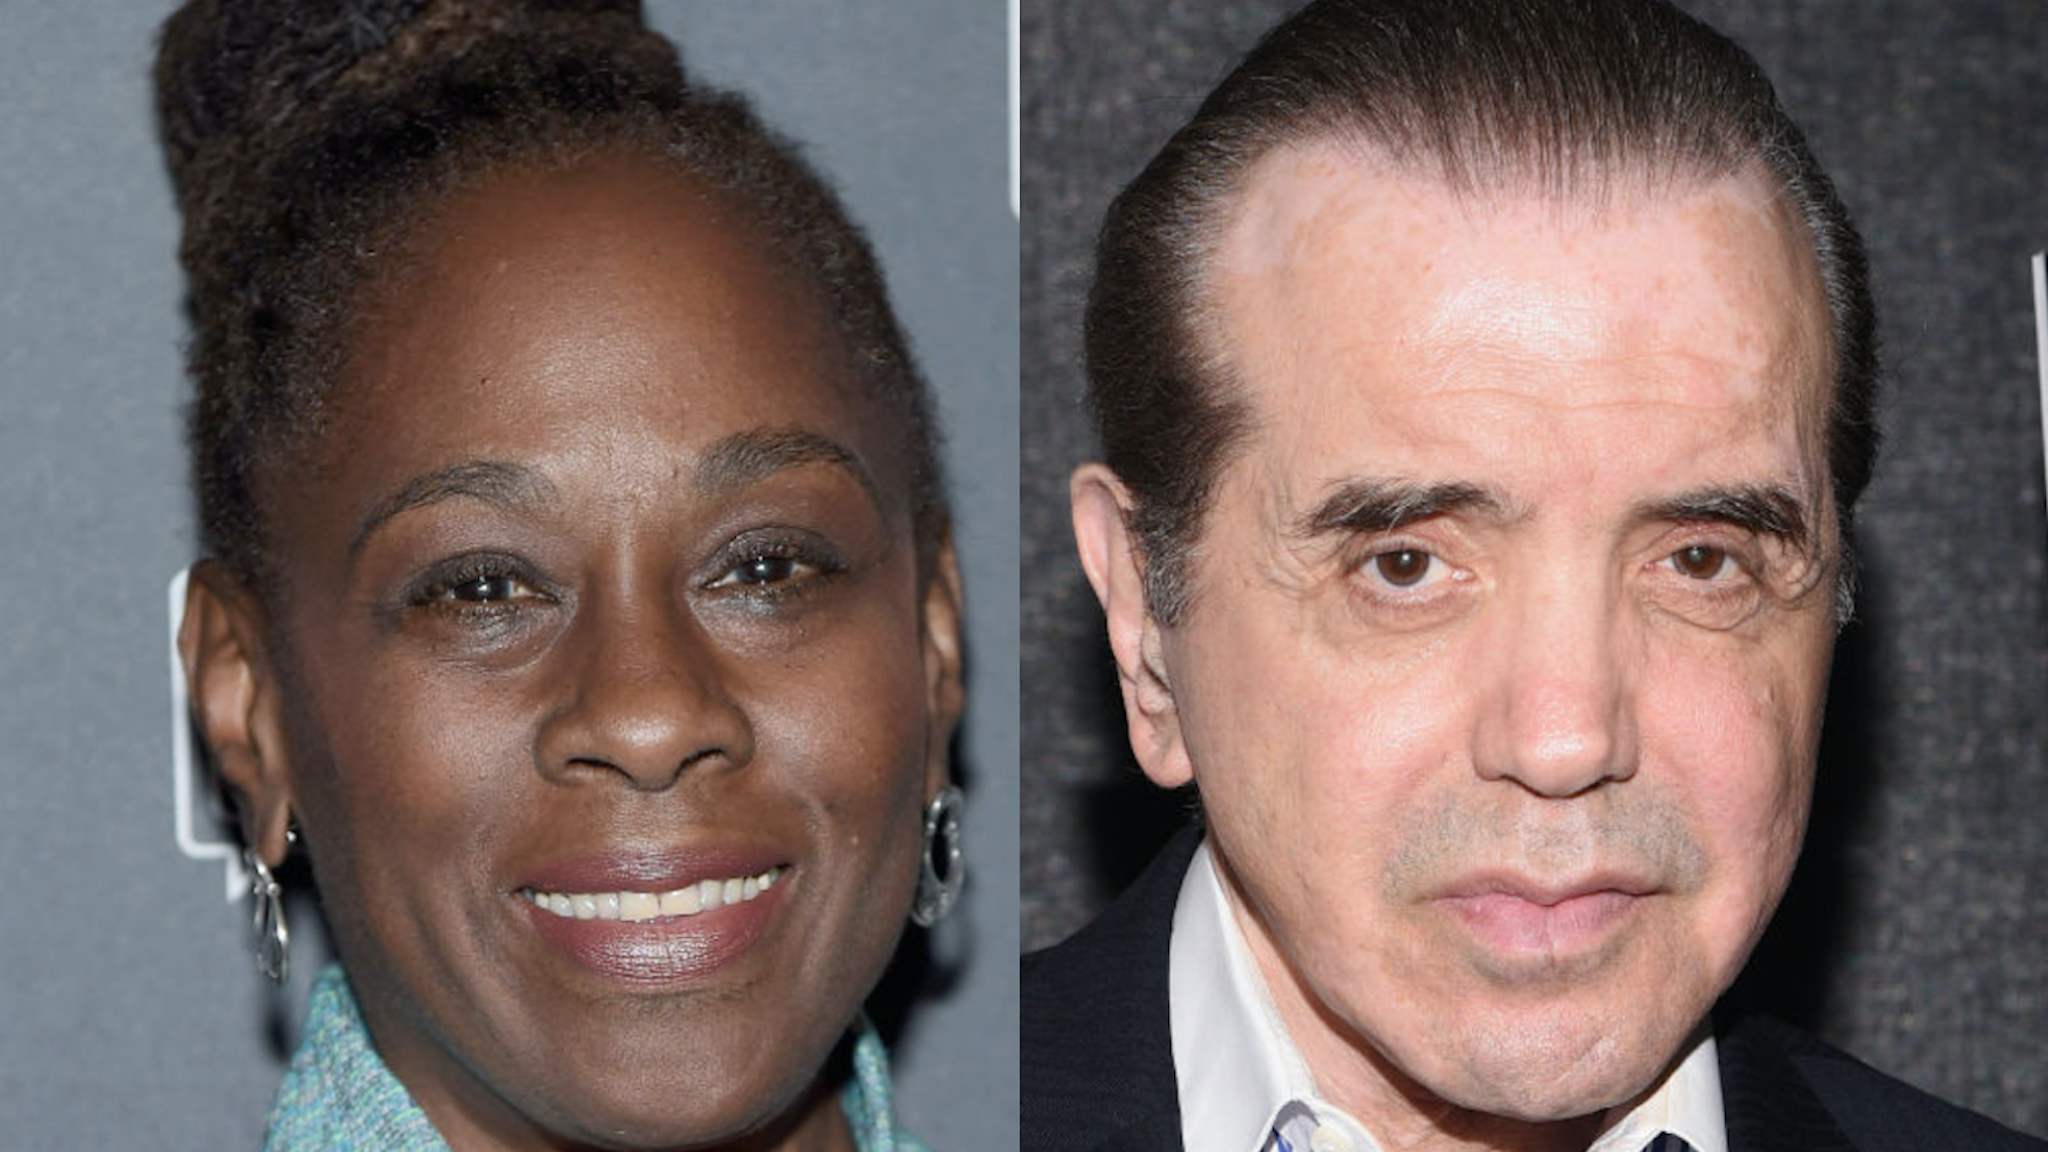 NYC First Lady Chirlane McCray attends the 6th Annual Bring Change to Mind's Revels & Revelations Fundraiser at Sony Hall on October 22, 2018 in New York City. // Honoree Chazz Palminteri attends the Bronx Children's Museum Gala at Edison Ballroom on May 8, 2018 in New York City.